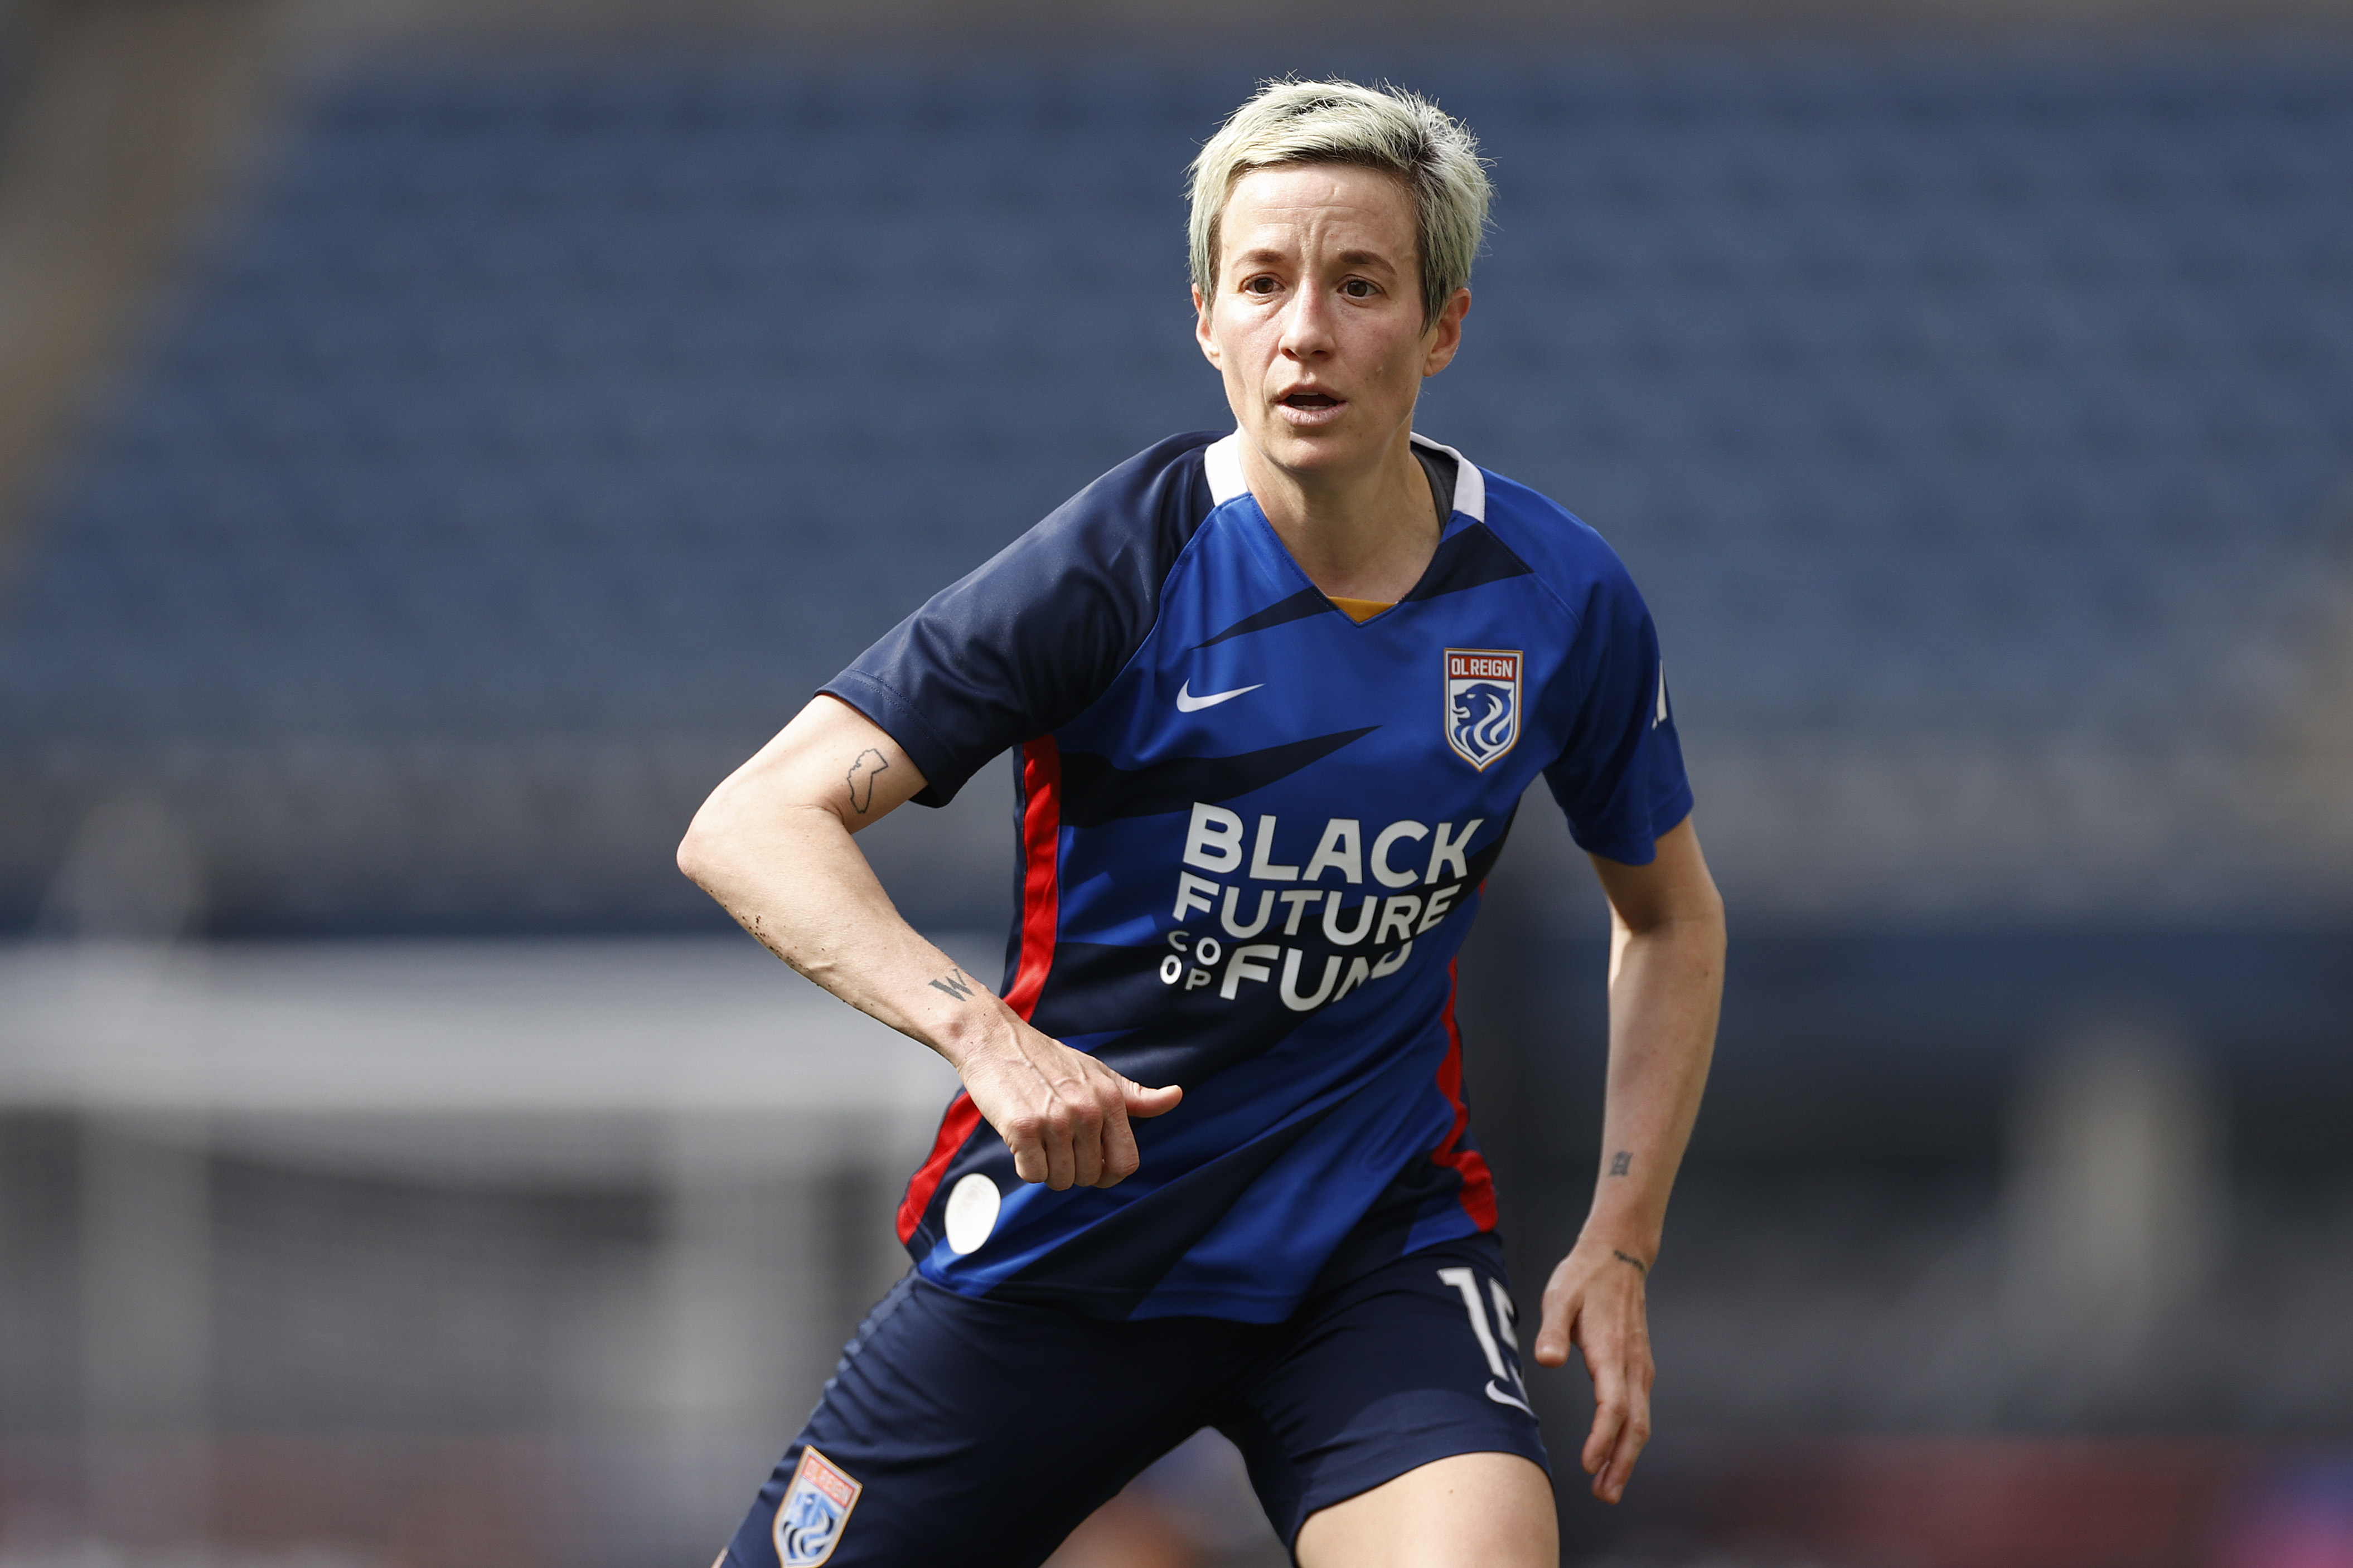 Megan Rapinoe of OL Reign looks on against the Washington Spirit during the second half at Lumen Field on May 22, 2022 in Seattle, Washington. (Steph Chambers/Getty Images)